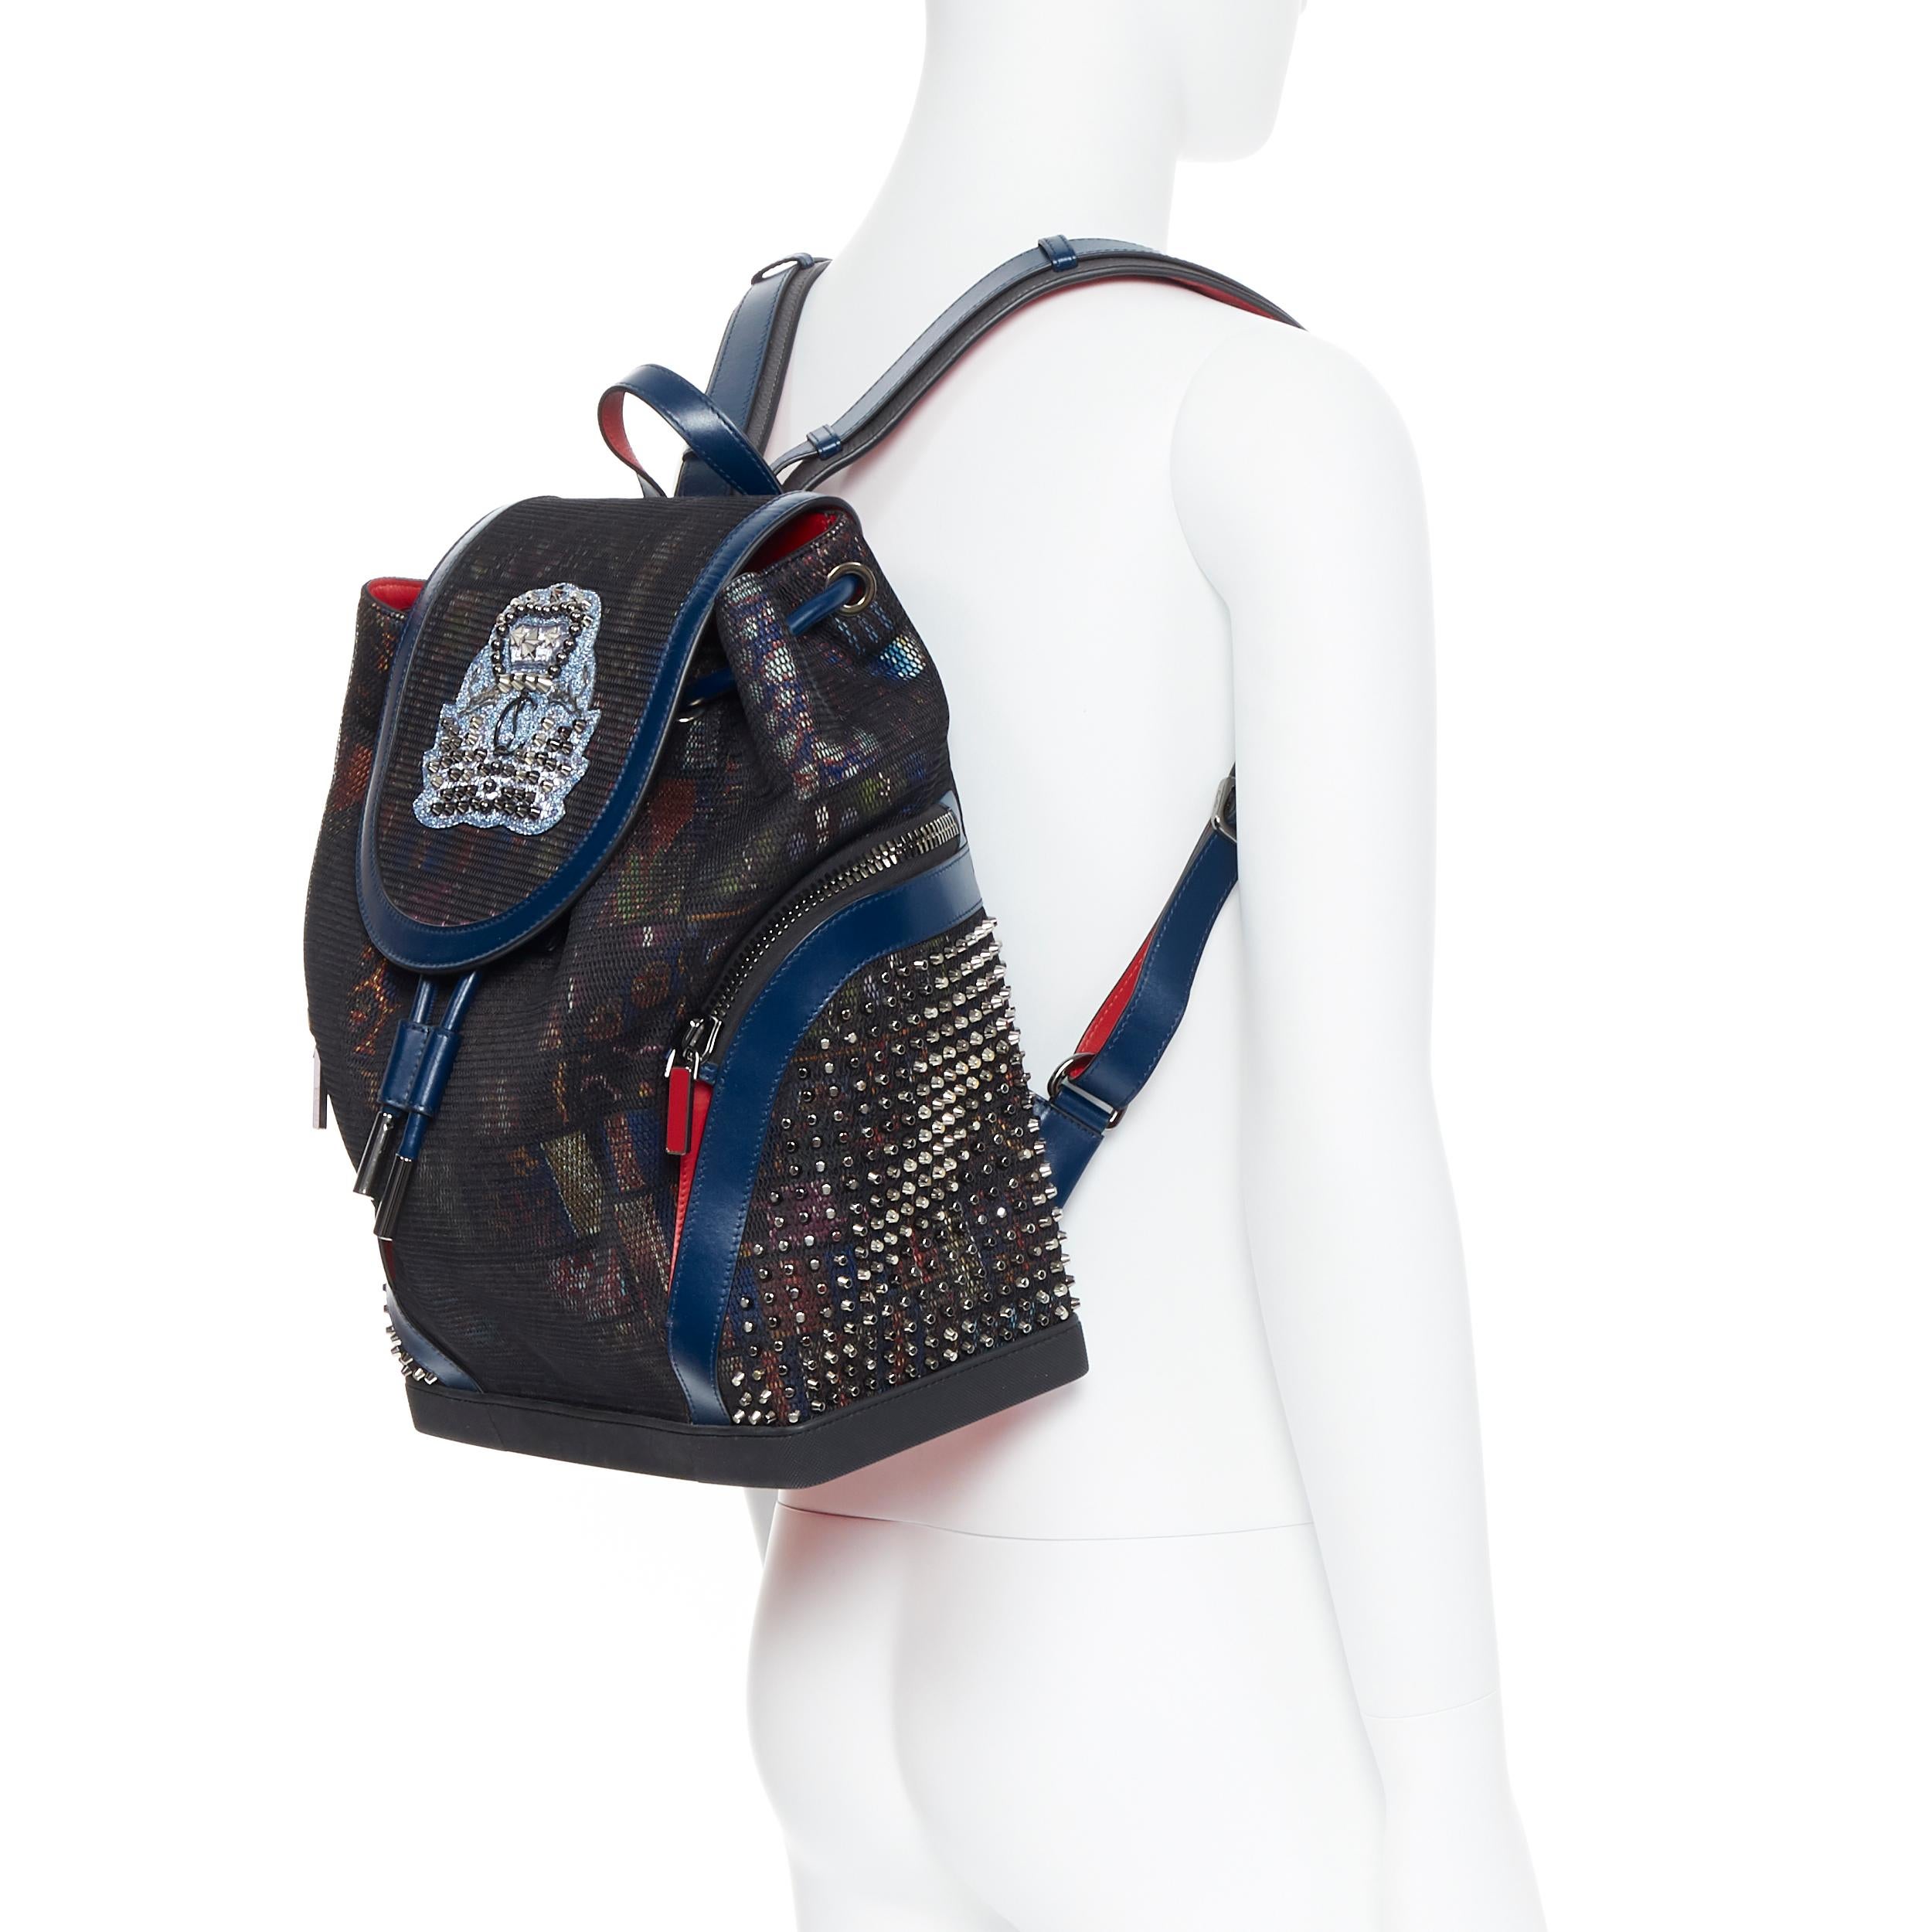 CHRISTIAN LOUBOUTIN Explorafunk studded printed mesh leather trimmed backpack
Brand: Christian Louboutin
Designer: Christian Louboutin
Model Name / Style: Explorafunk
Material: Leather
Color: Navy
Pattern: Abstract
Closure: Zip
Extra Detail: